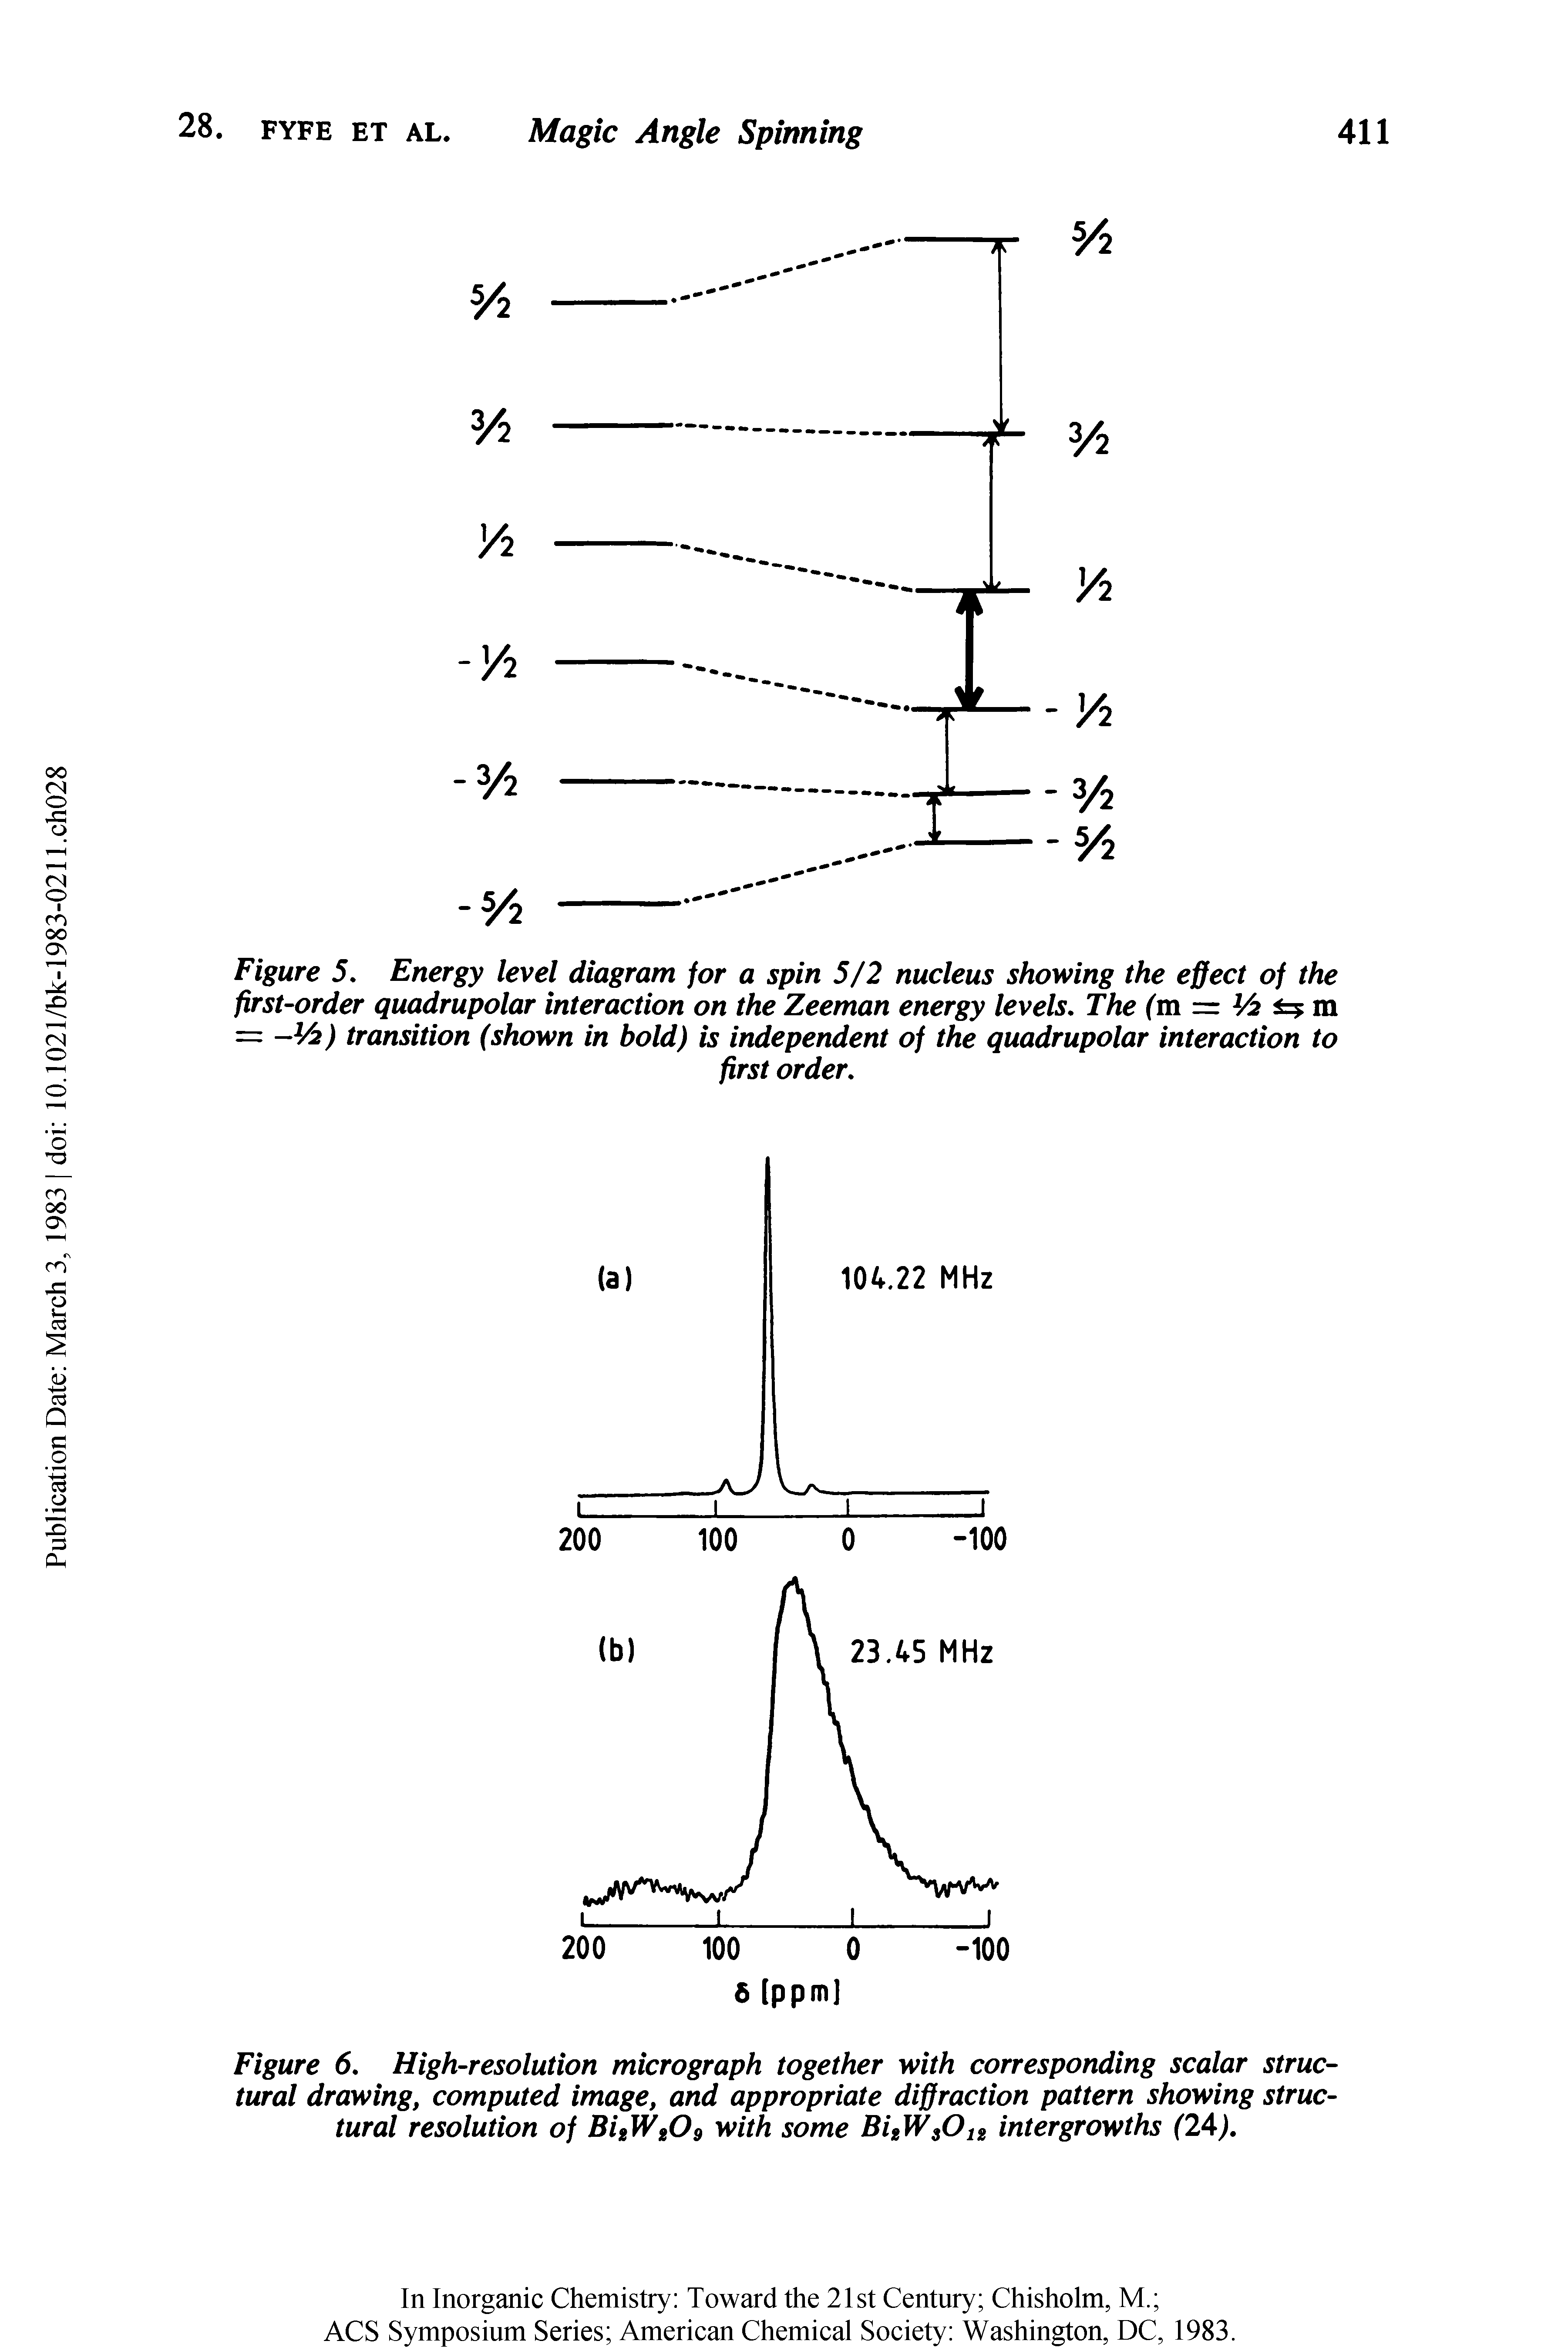 Figure 5. Energy level diagram for a spin 5/2 nucleus showing the effect of the first-order quadrupolar interaction on the Zeeman energy levels. The (m V2 m = -V2) transition (shown in bold) is independent of the quadrupolar interaction to...